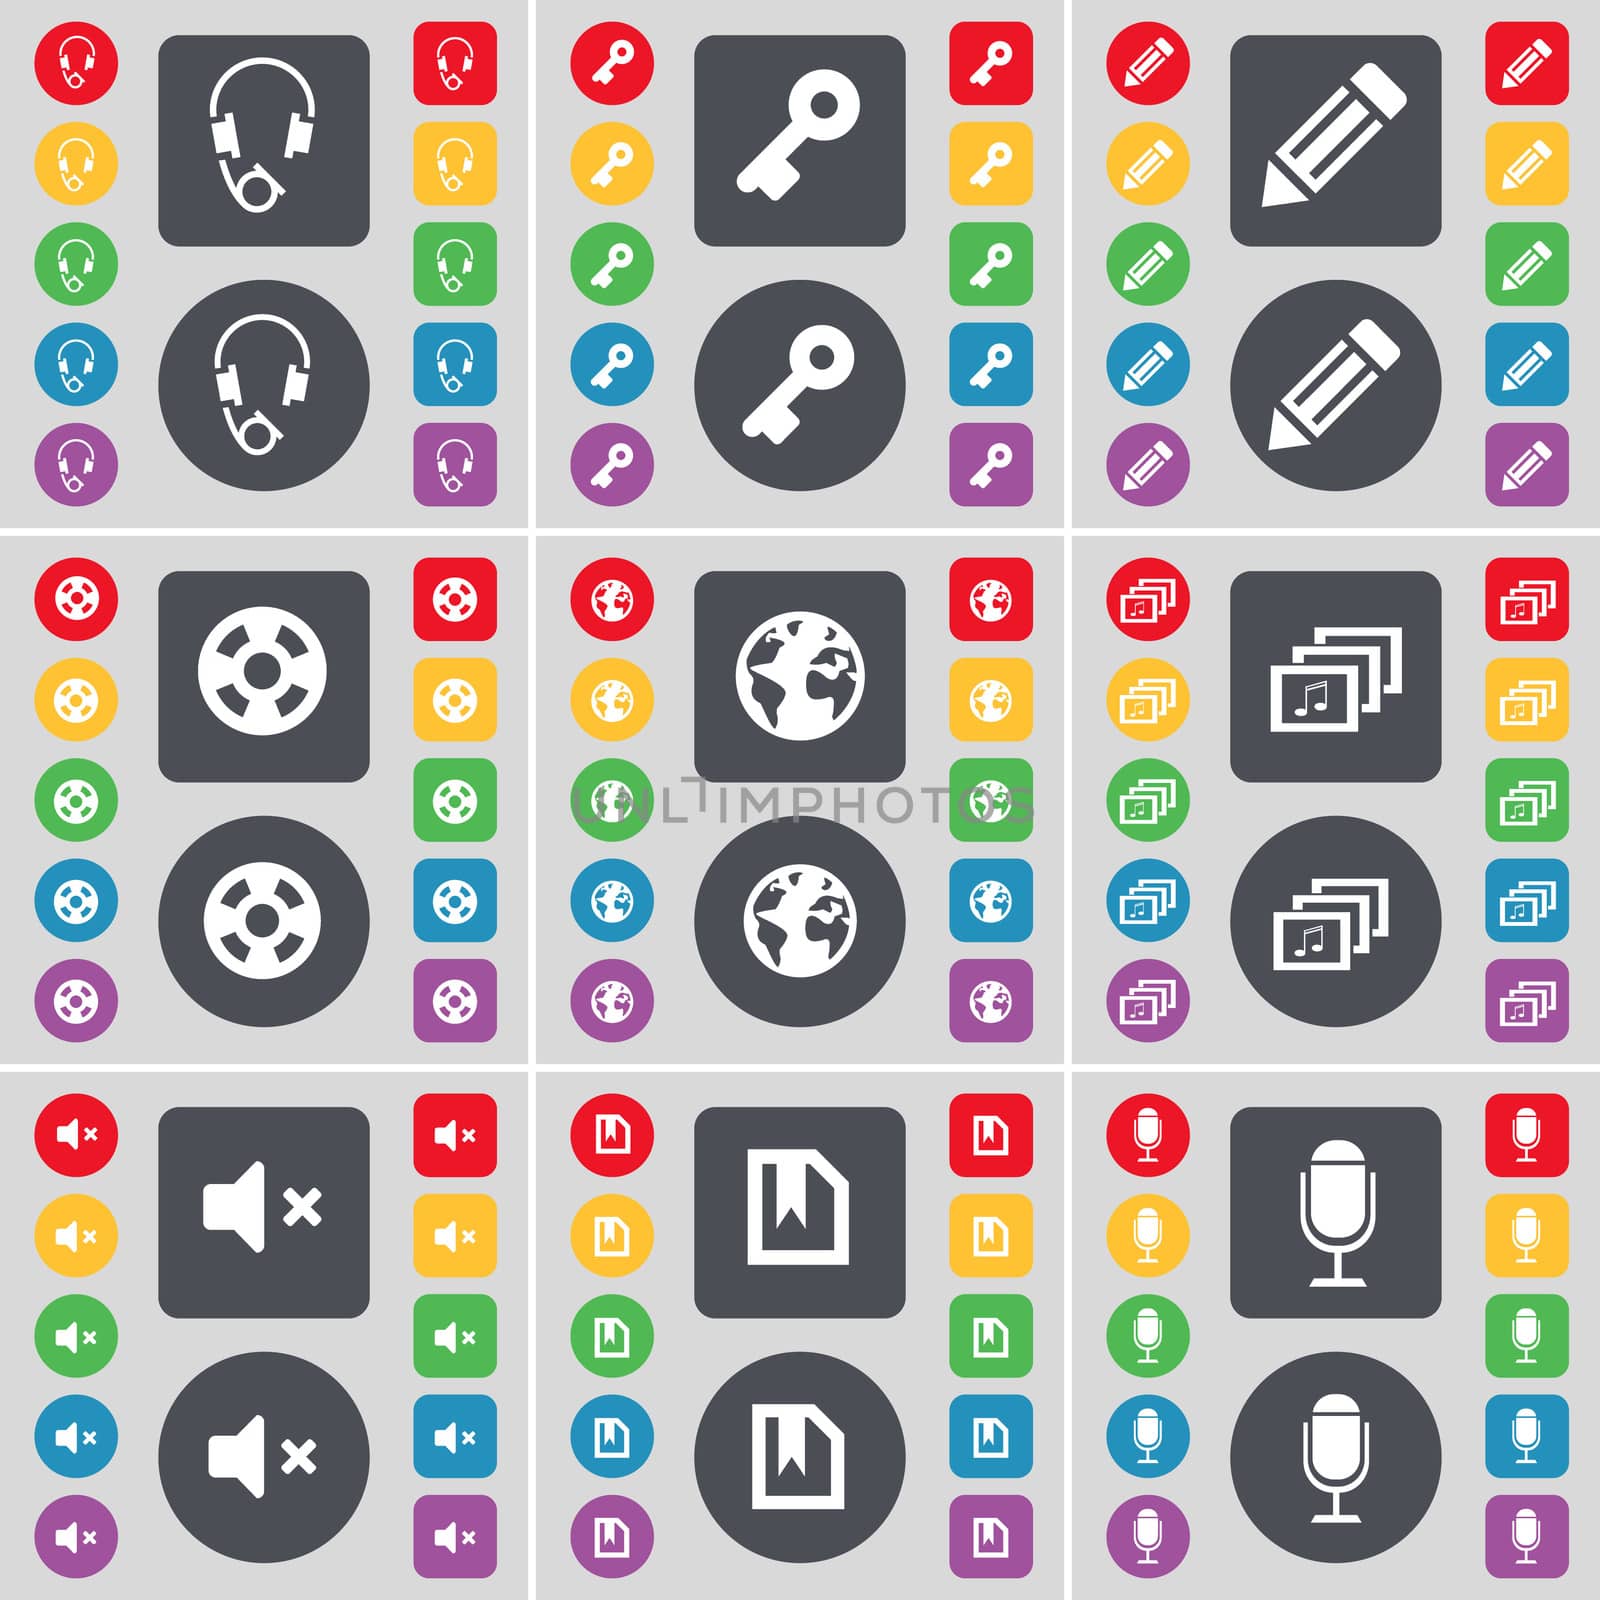 Headphones, Key, Pencil, Videotape, Earth, Gallery, Mute, File, Microphone icon symbol. A large set of flat, colored buttons for your design. illustration